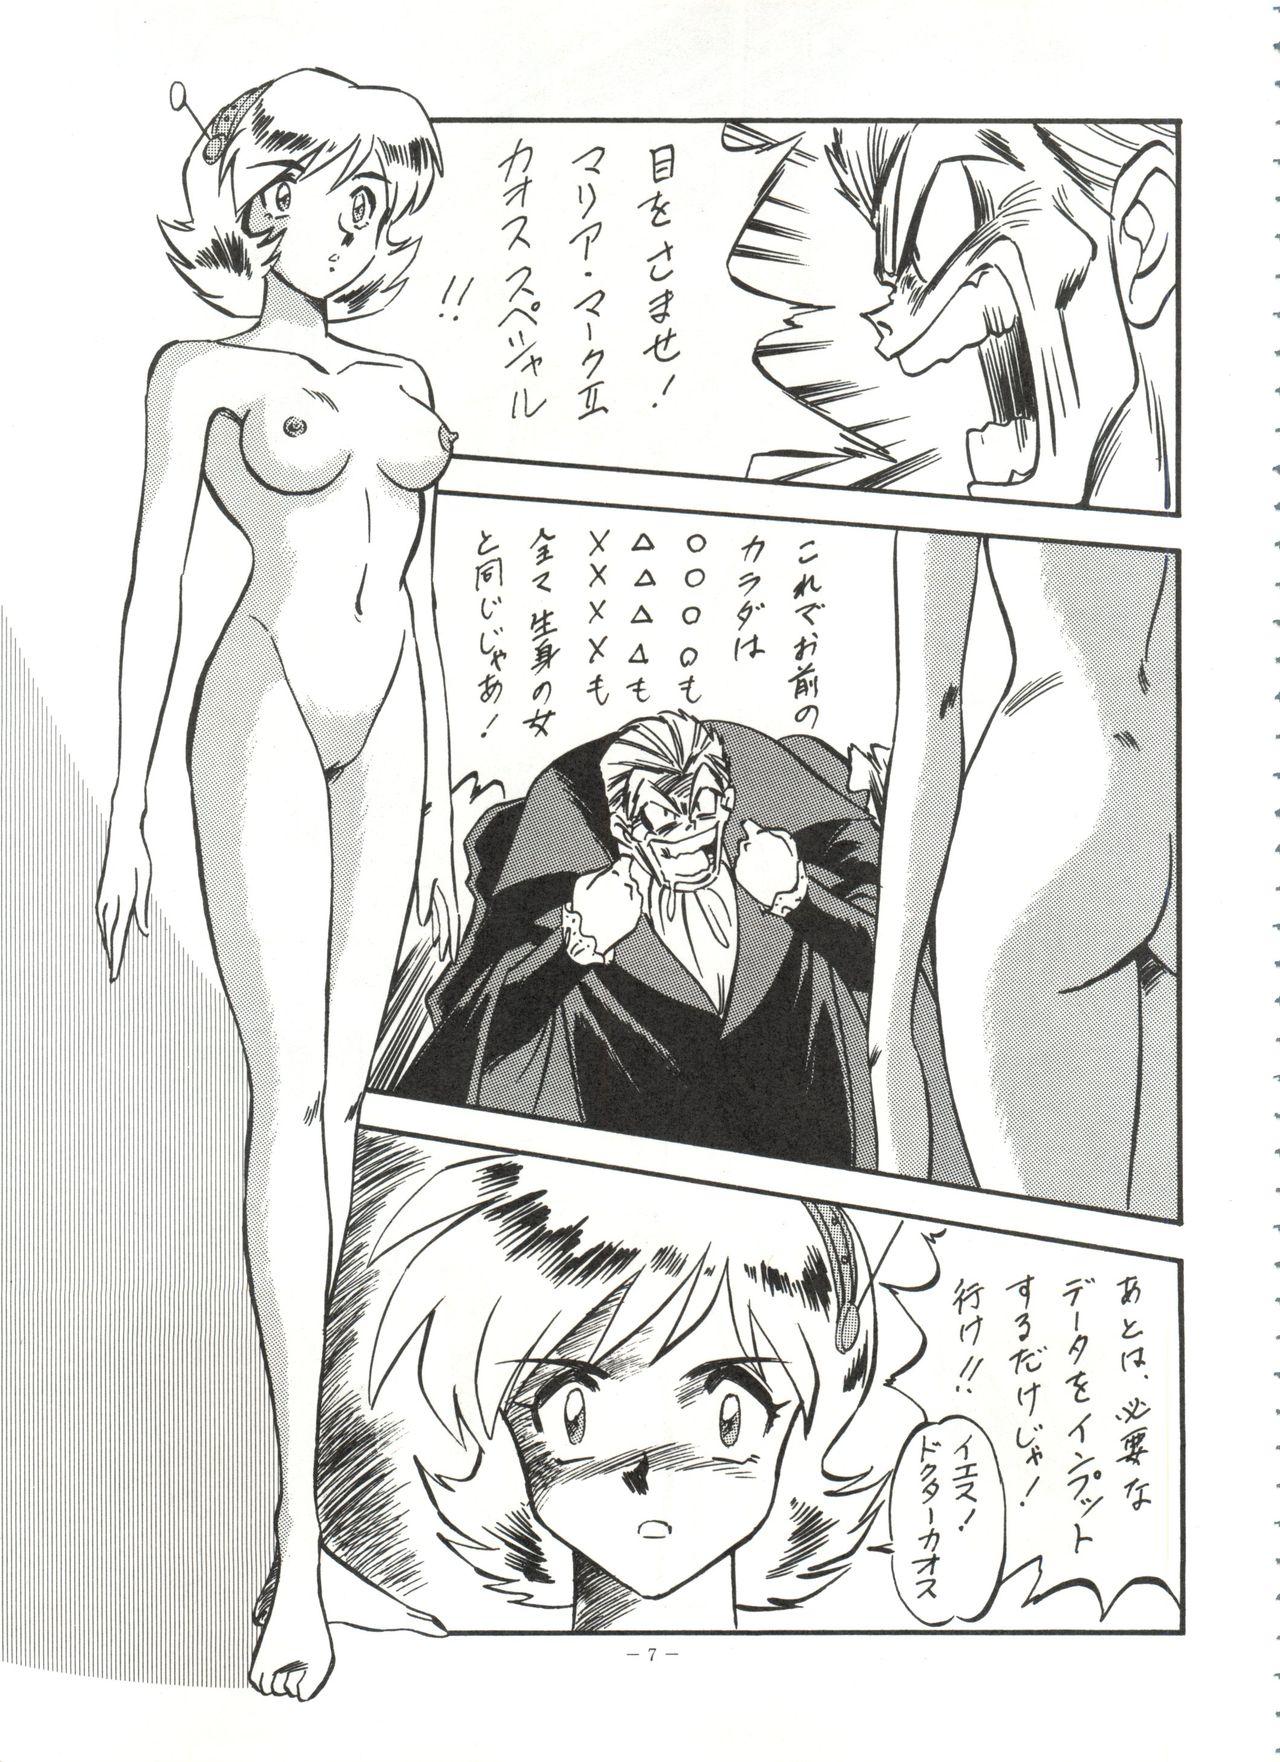 Babe LOOK OUT 31 - Sailor moon Ghost sweeper mikami Lord of lords ryu knight Patlabor Brave police j-decker Bhabi - Page 6